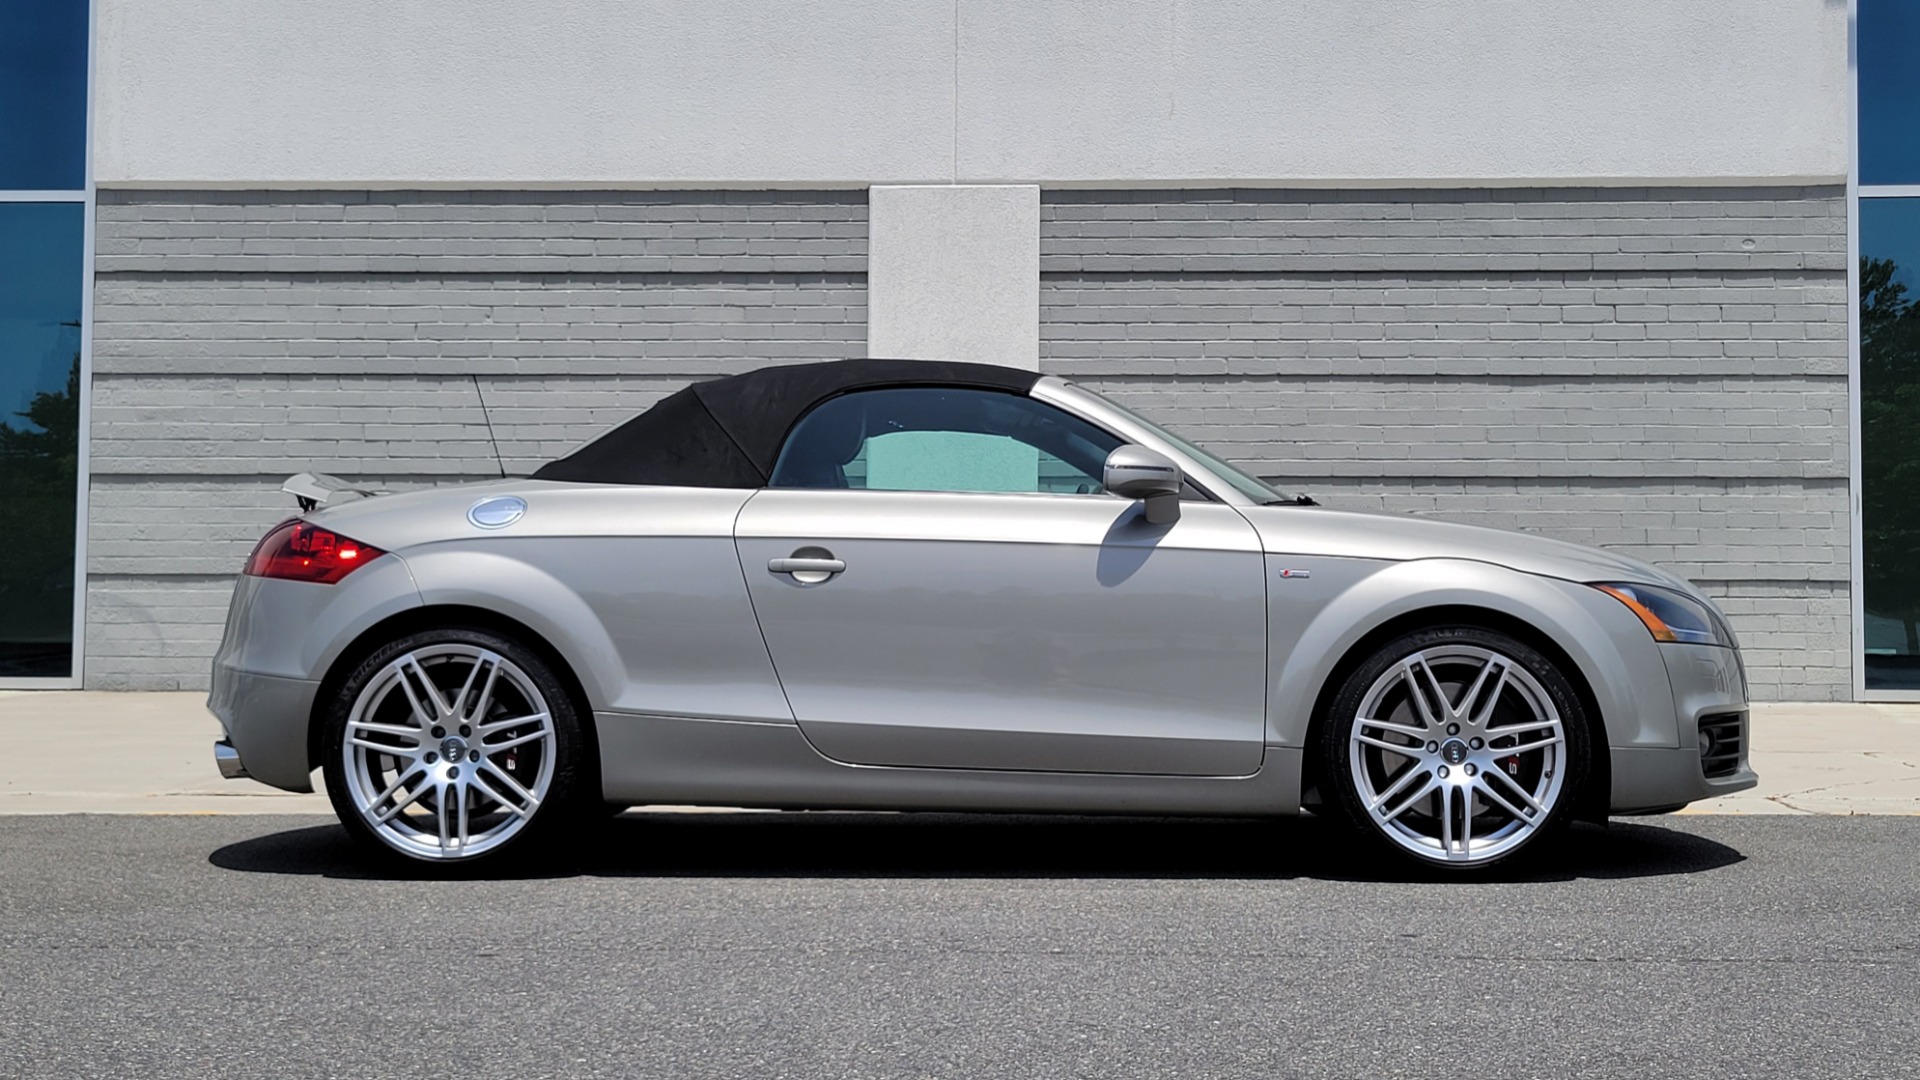 Used 2008 Audi TT 3.2L CONVERTIBLE / MANUAL / 19IN WHEELS / LOW MILES for sale Sold at Formula Imports in Charlotte NC 28227 8